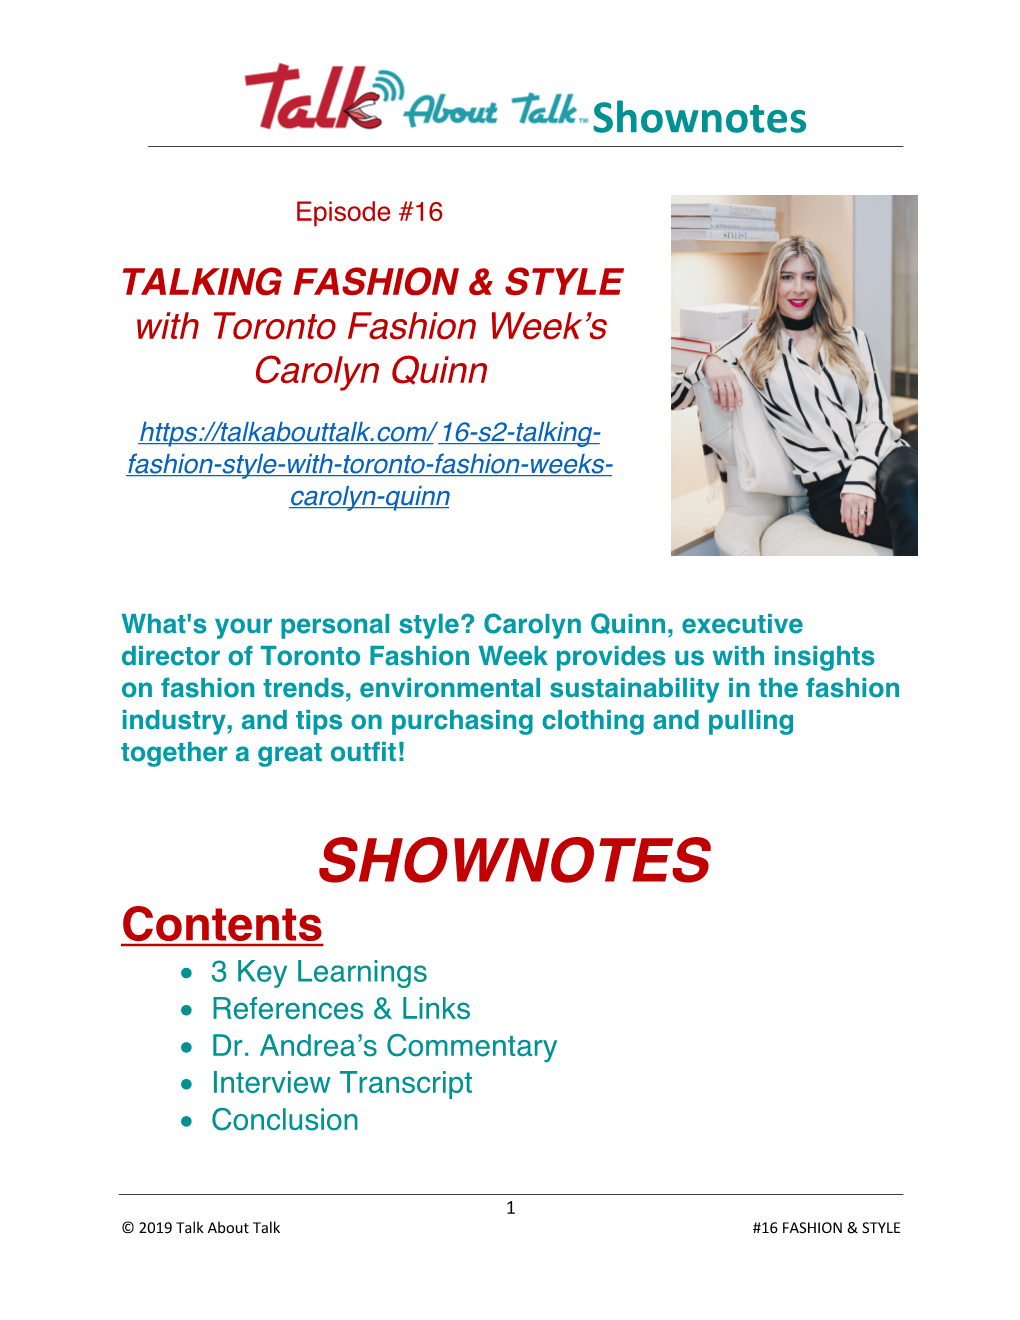 Shownotes #16(S2) TALKING FASHION & STYLE with Carolyn Quinn